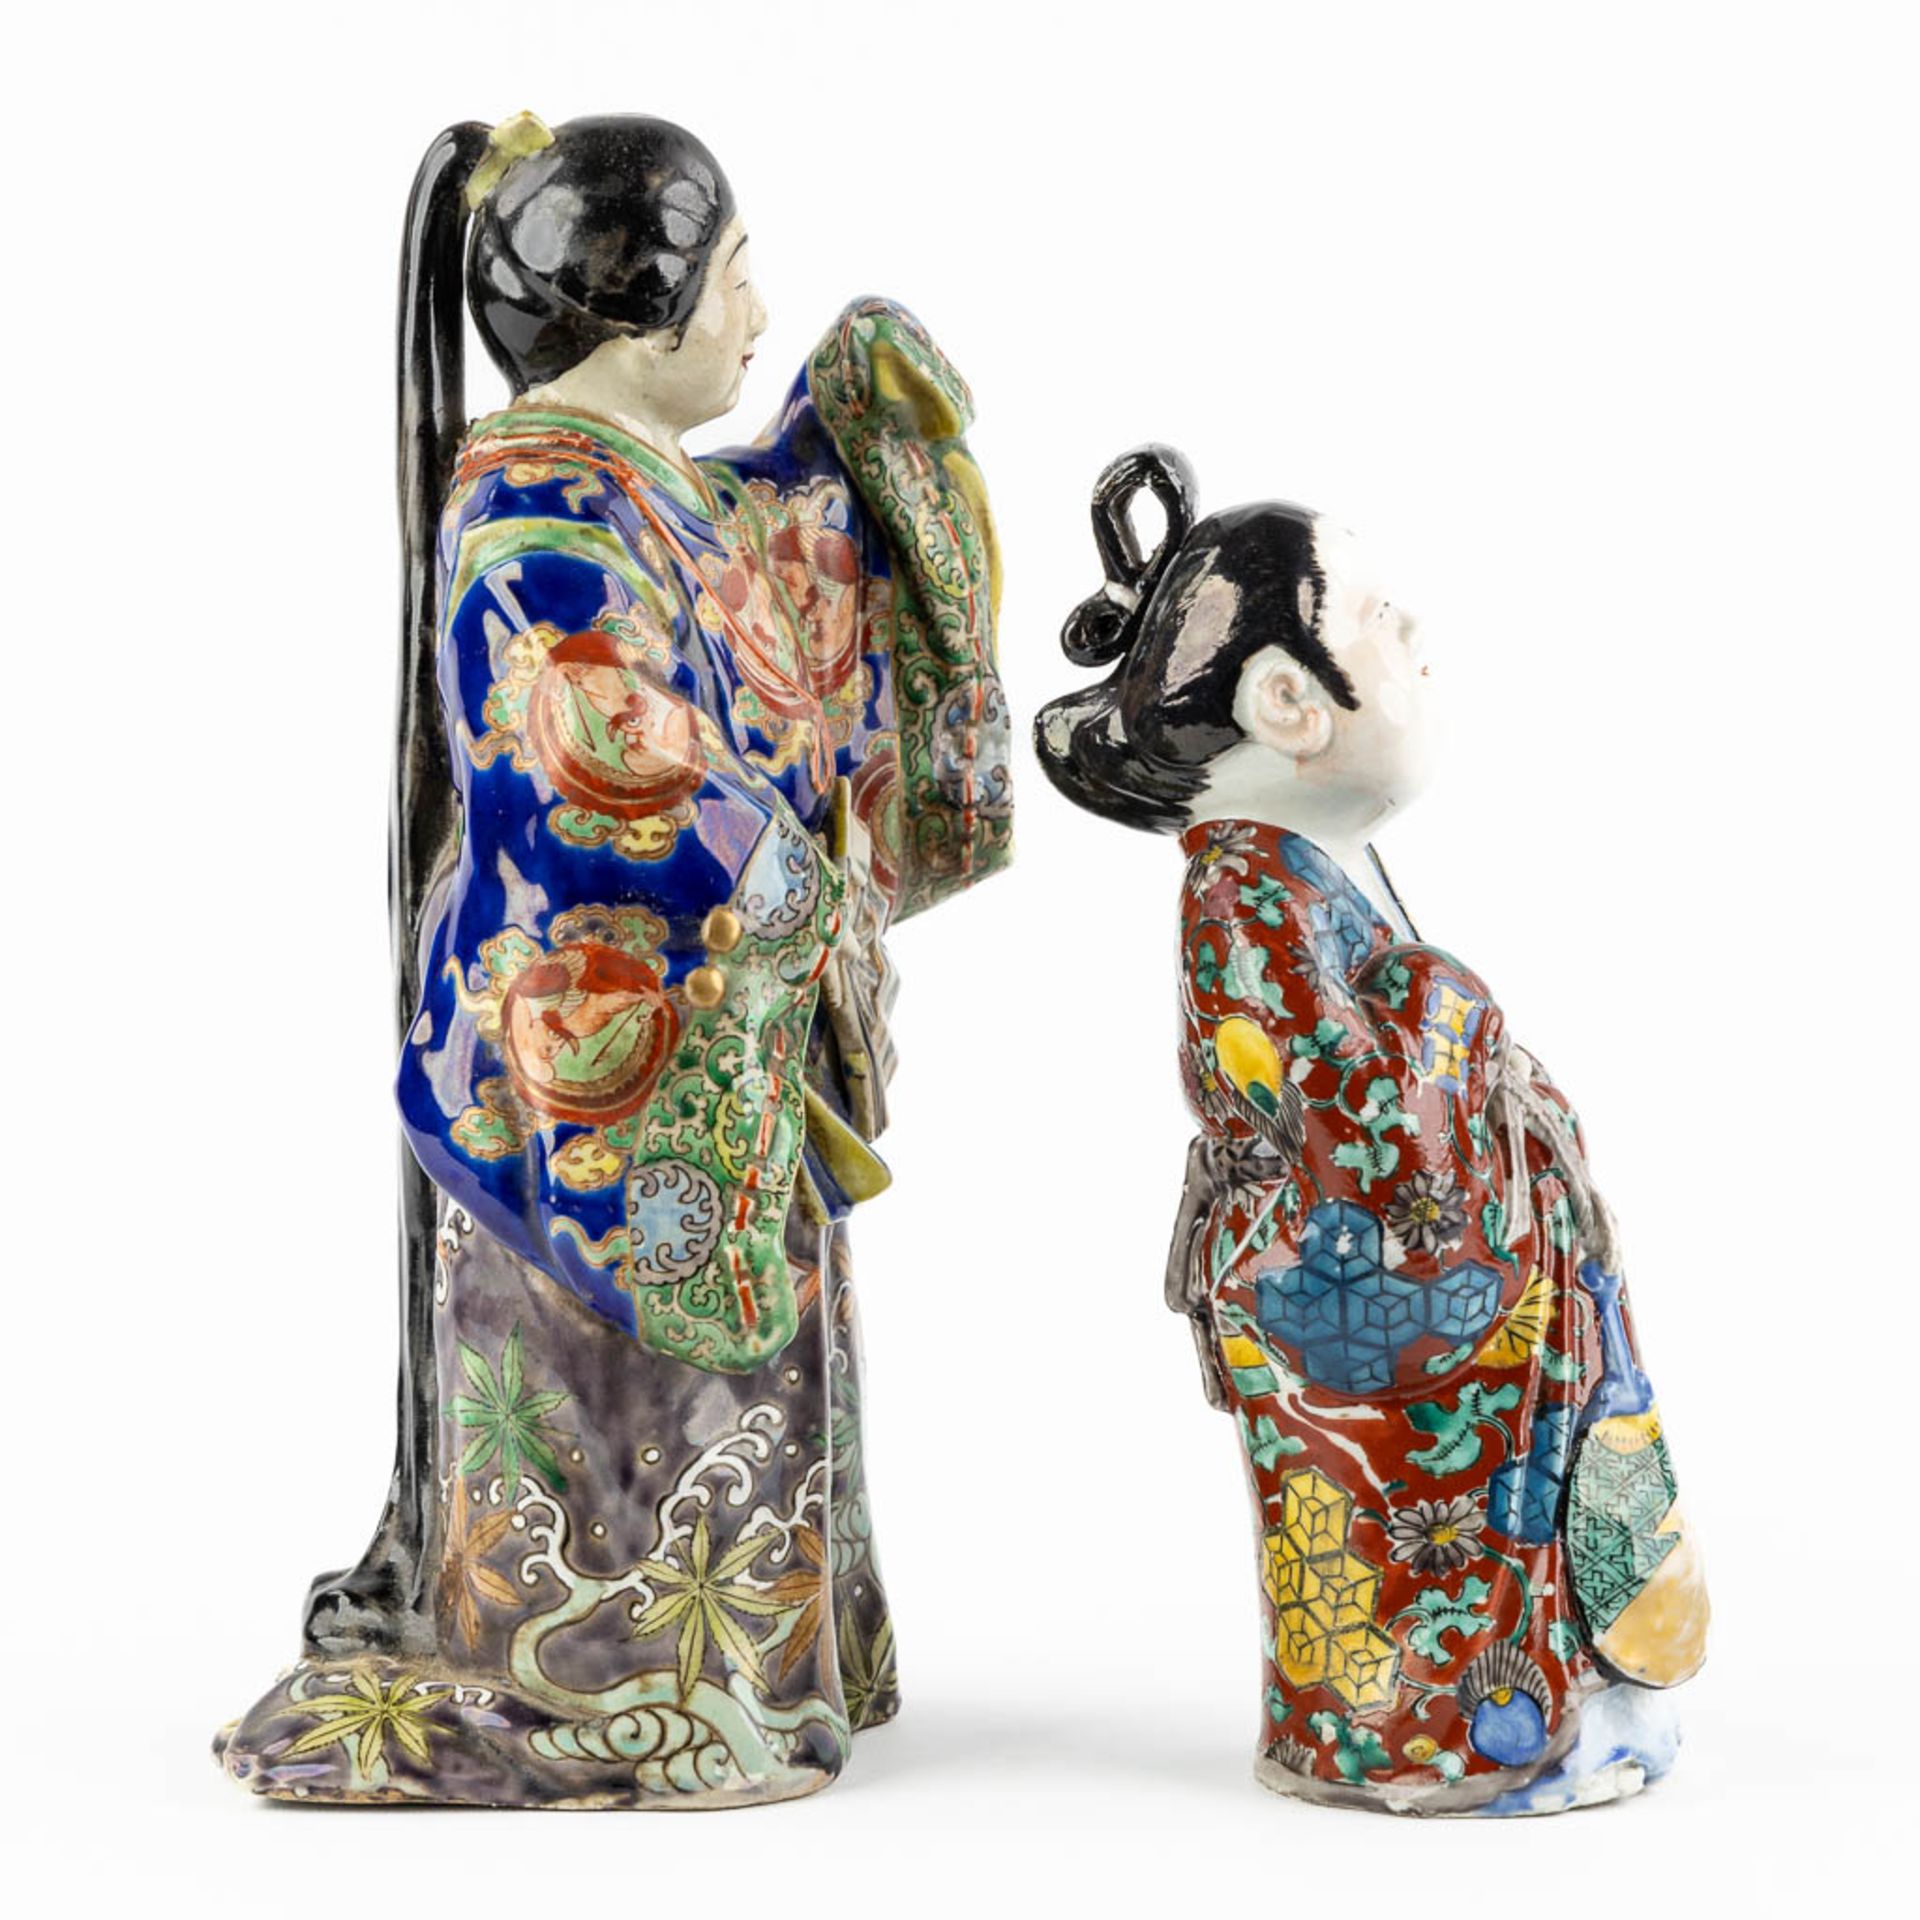 Two Japanese figurines, glazed stoneware. 19th/20th C. (L:14 x W:17 x H:32 cm) - Image 4 of 12